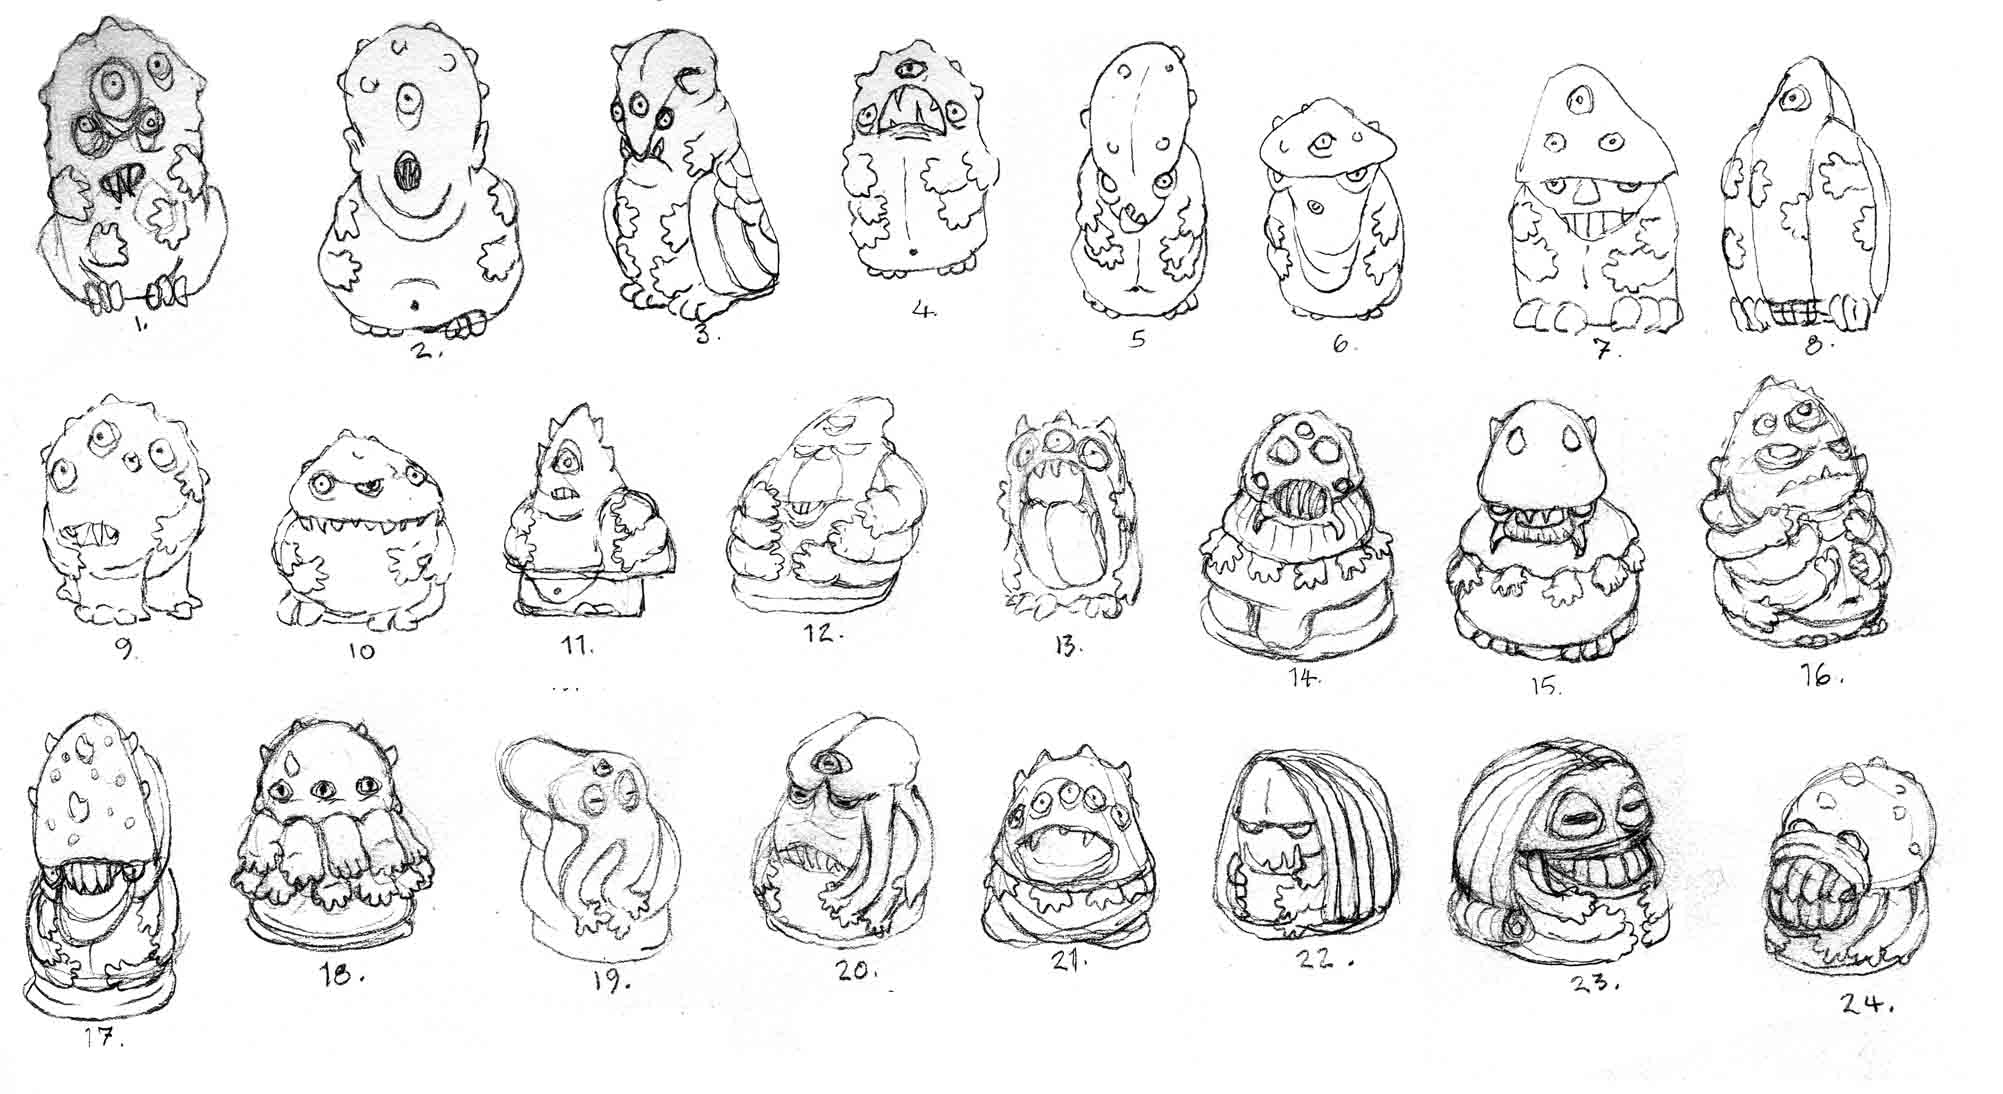 These are 24 small pencil concept drawings that I submitted to director Larry Blamire for his film "The Lost Skeleton Returns Again." He needed a primitive carved stone idol for the "Cantaloupe People" ... something uncomfortable and unseemly. I submitted these sketches and you can see which one he chose... the one with the most little baby arms that I'd have sculpt. As soon as I drew that No. 18, I had my suspicions that it would be the chosen Dalp.